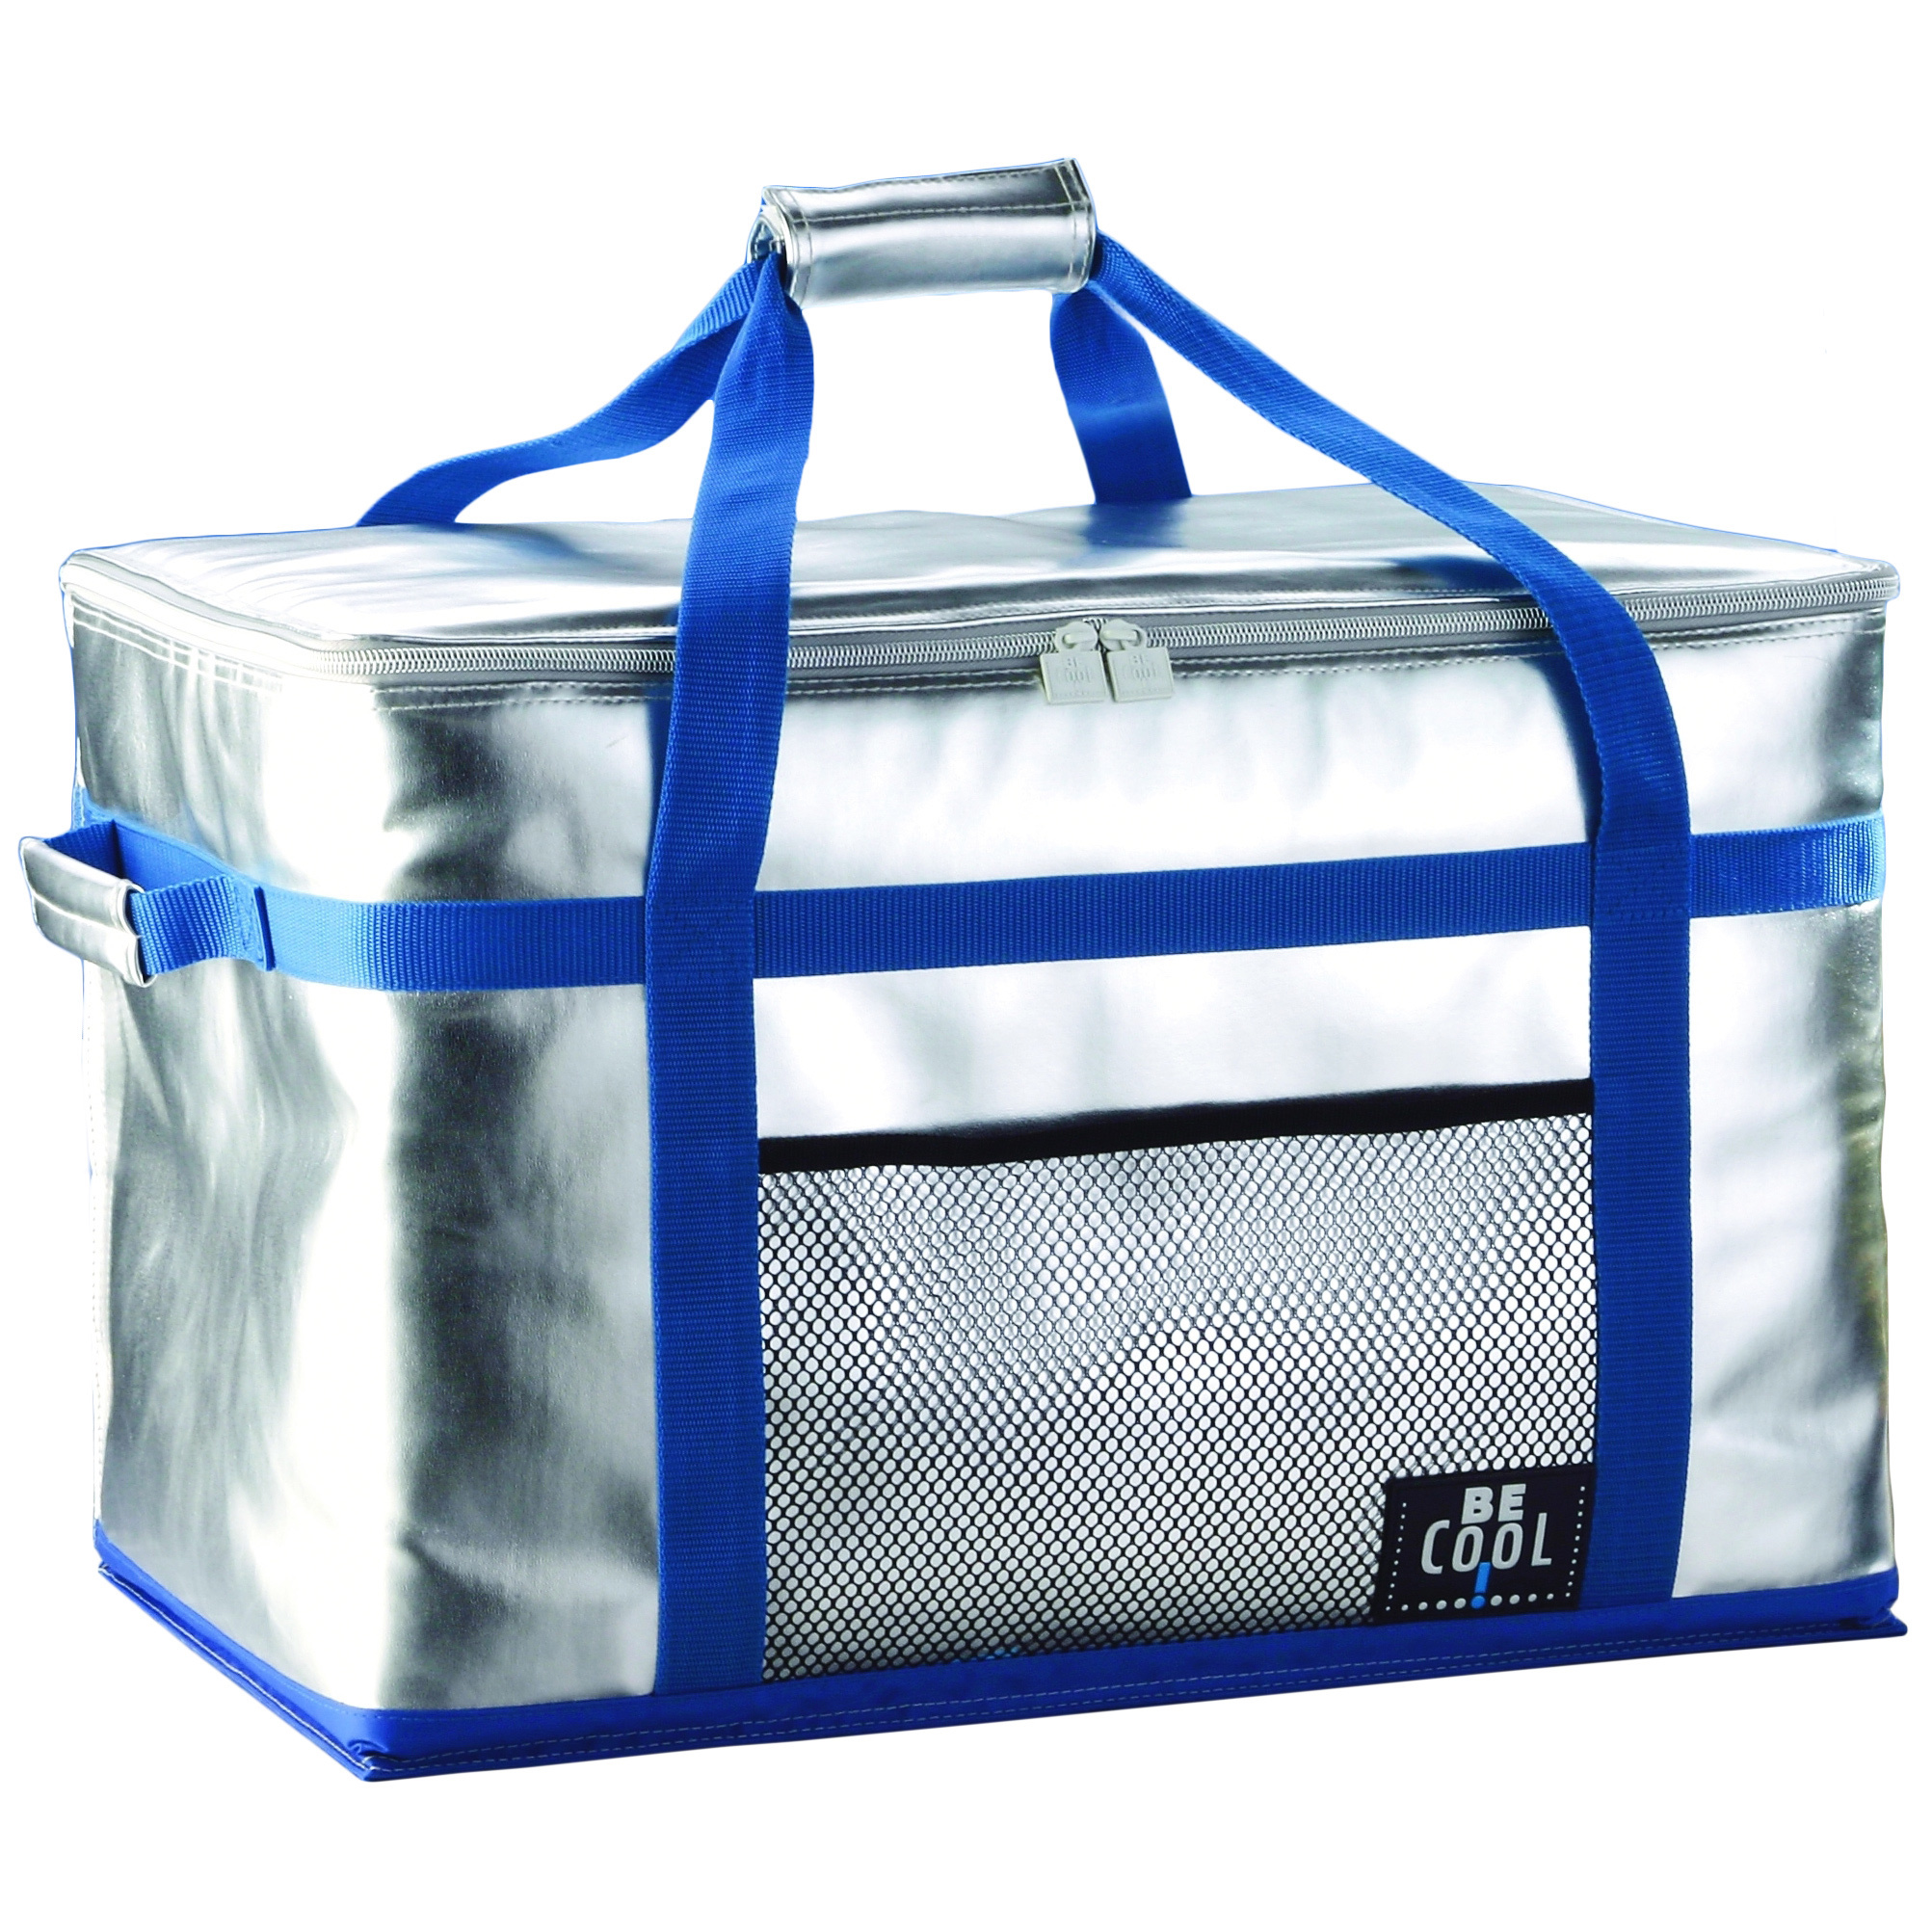 9 be cool silver blue lunch box